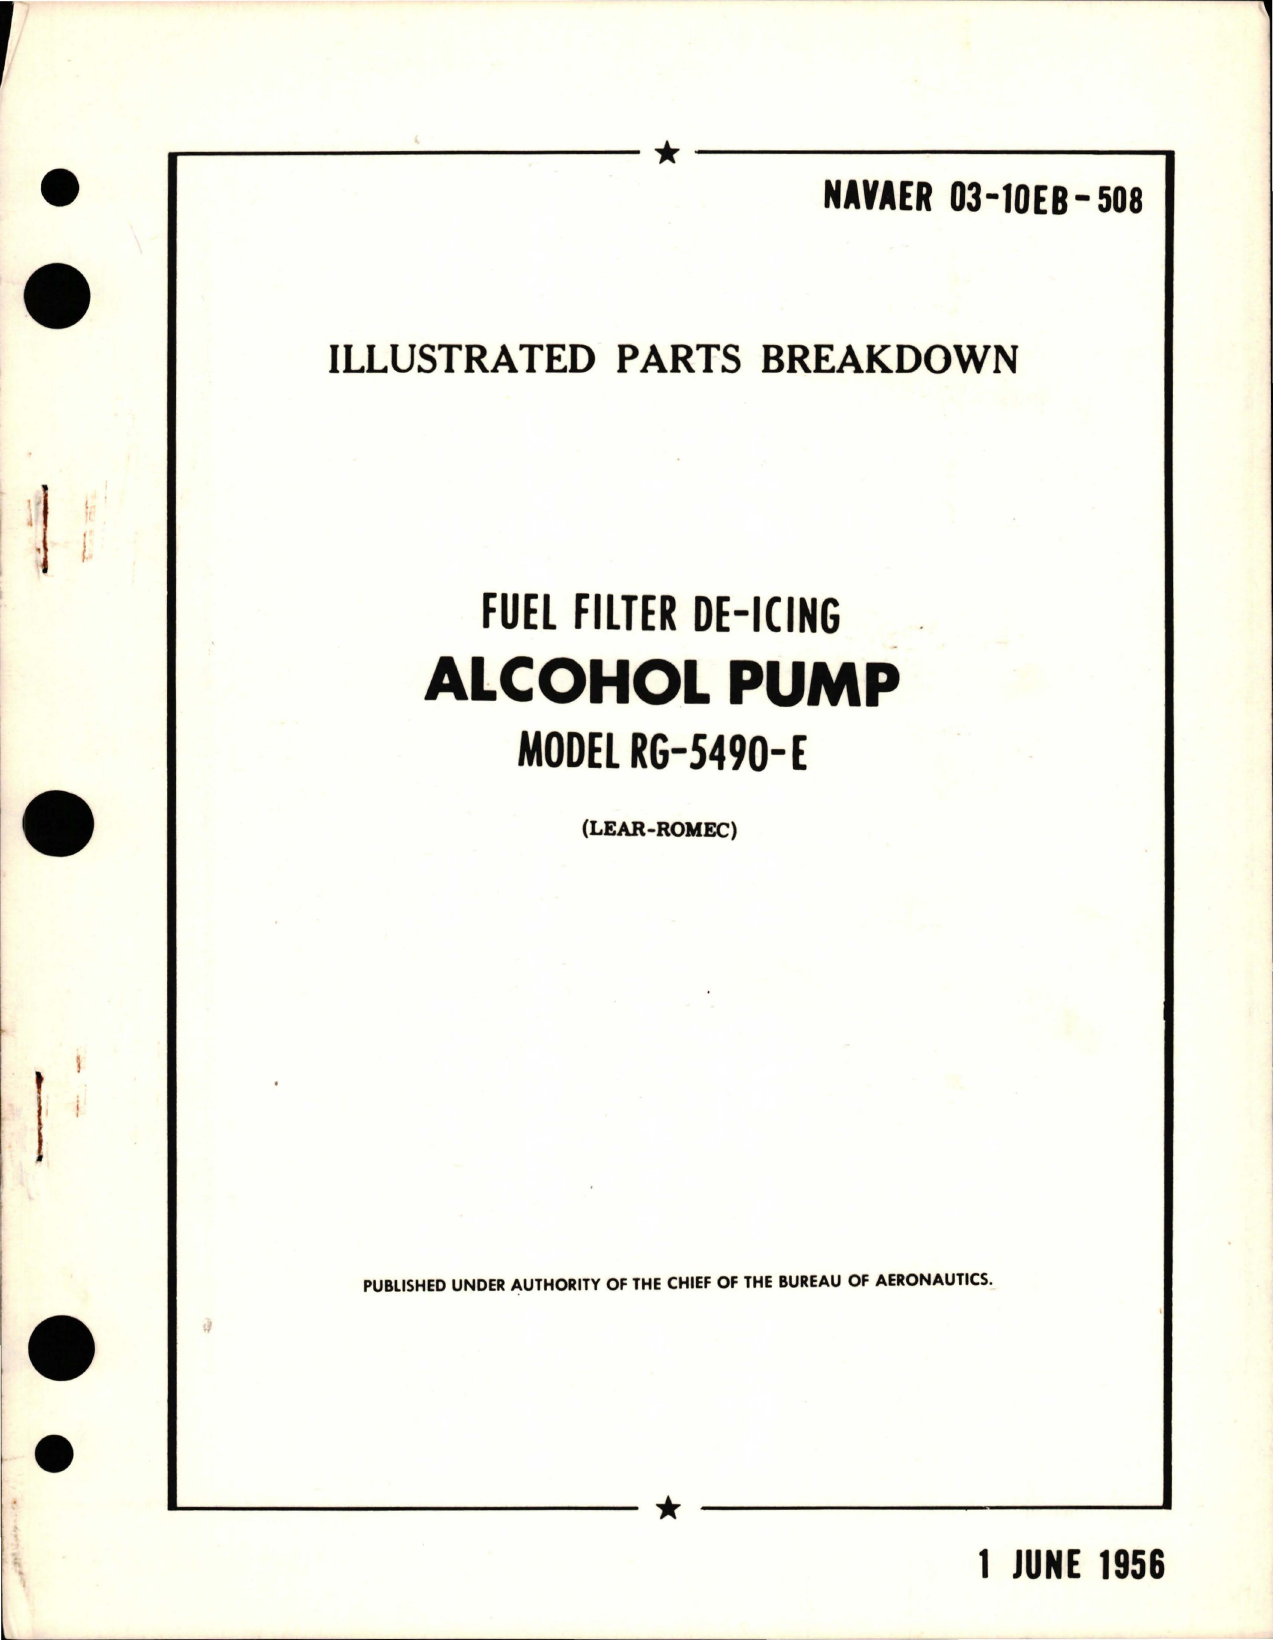 Sample page 1 from AirCorps Library document: Illustrated Parts Breakdown for Fuel Filter De-Icing Alcohol Pump - Model RG-5490-E